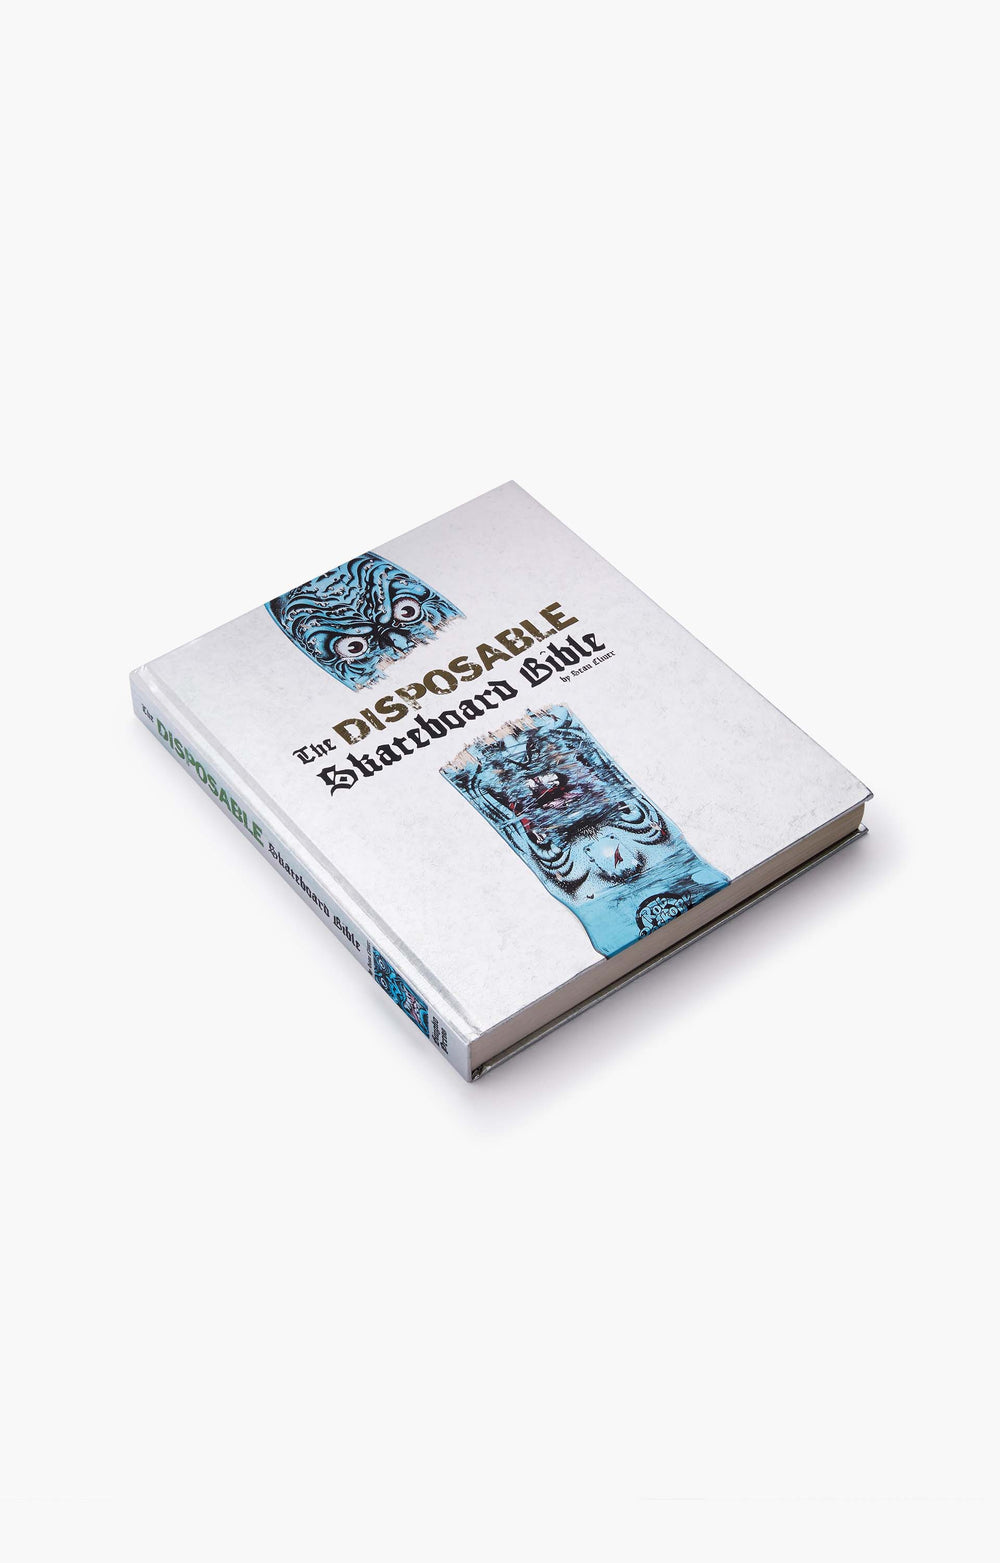 The Disposable Skateboard Bible: 10th Anniversary Edition